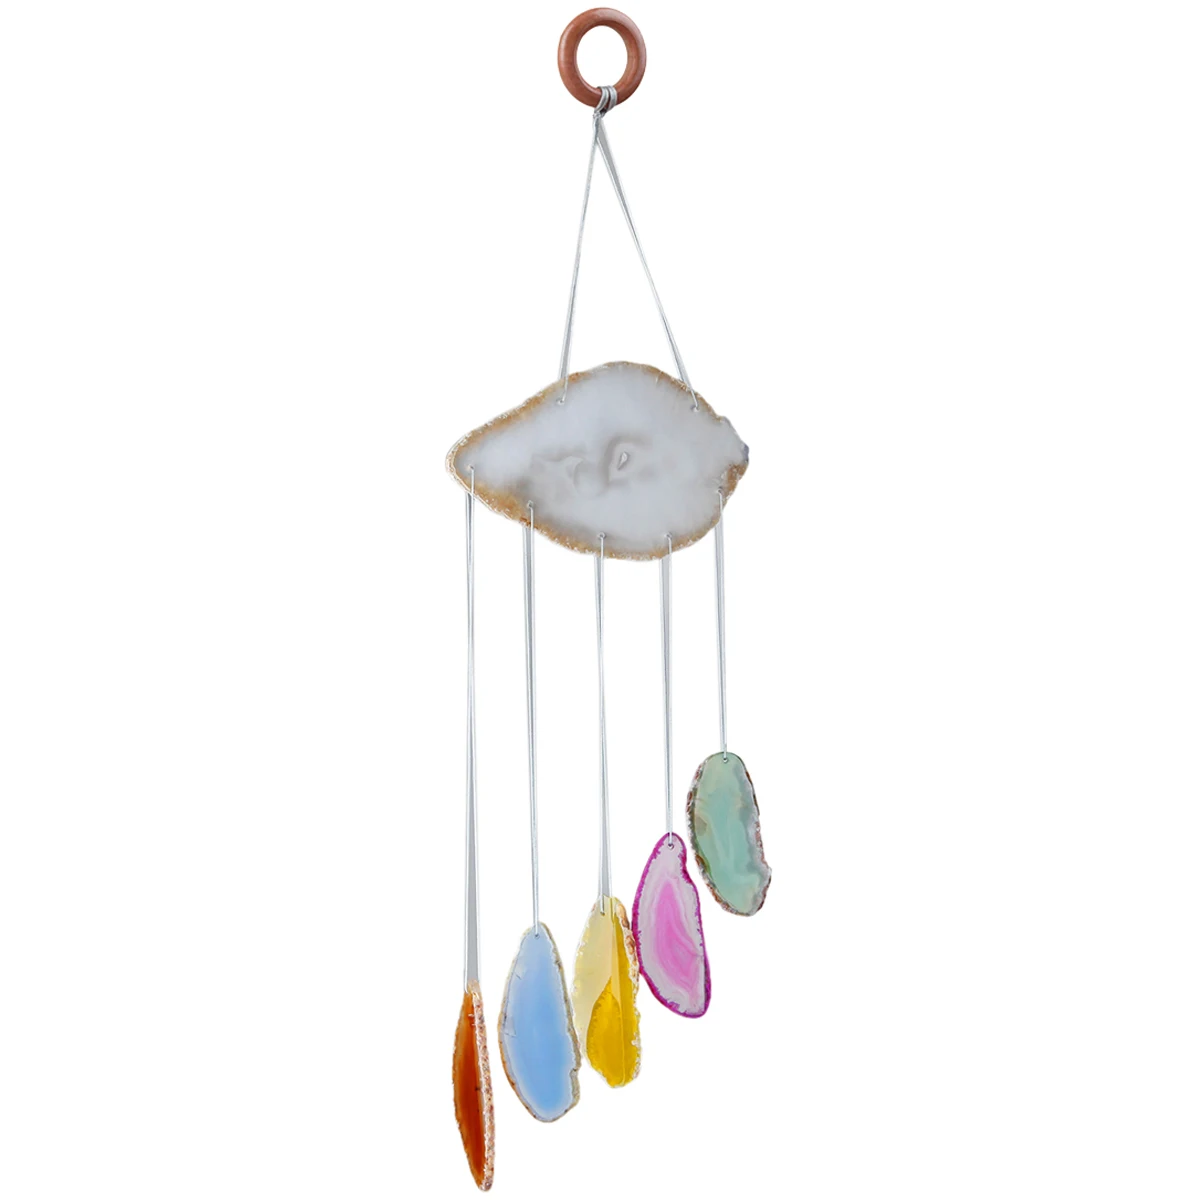 Natural Agate Slices Wind Chimes Handmade Wall Window Hanging Ornaments For Hoome Decoration pink jewelry counter window jewelry display rack purple velvet ring necklace display prop image decoration jewelry display rack